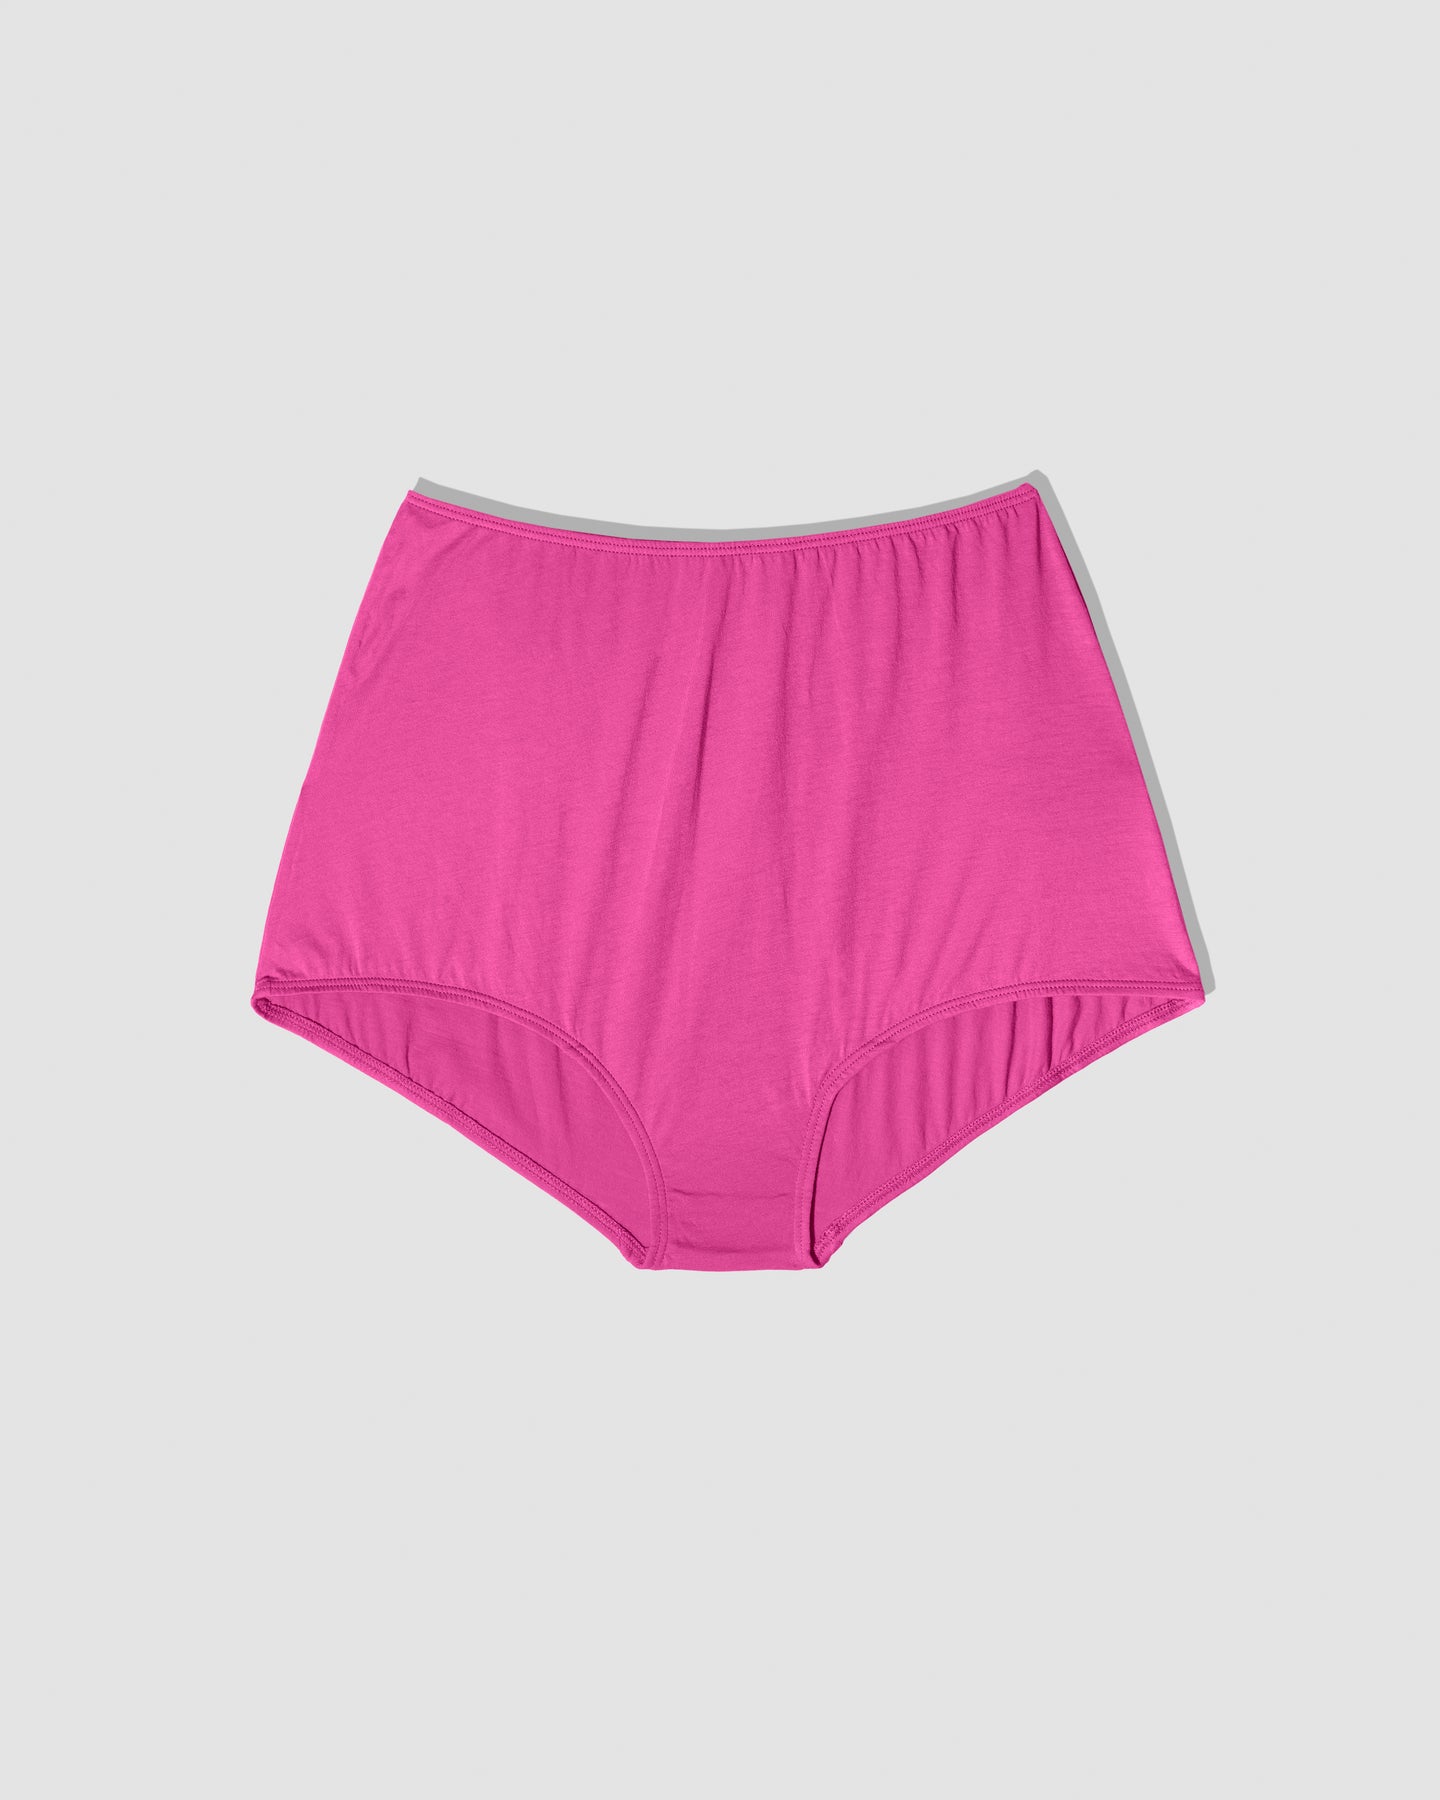 100% Cotton Boyshorts Panties for Women High Waisted Underwear Ladies Full  Briefs Panty Sleep Underpants Lingerie (Color : Pink, Size : 4XL 120) :  : Clothing, Shoes & Accessories